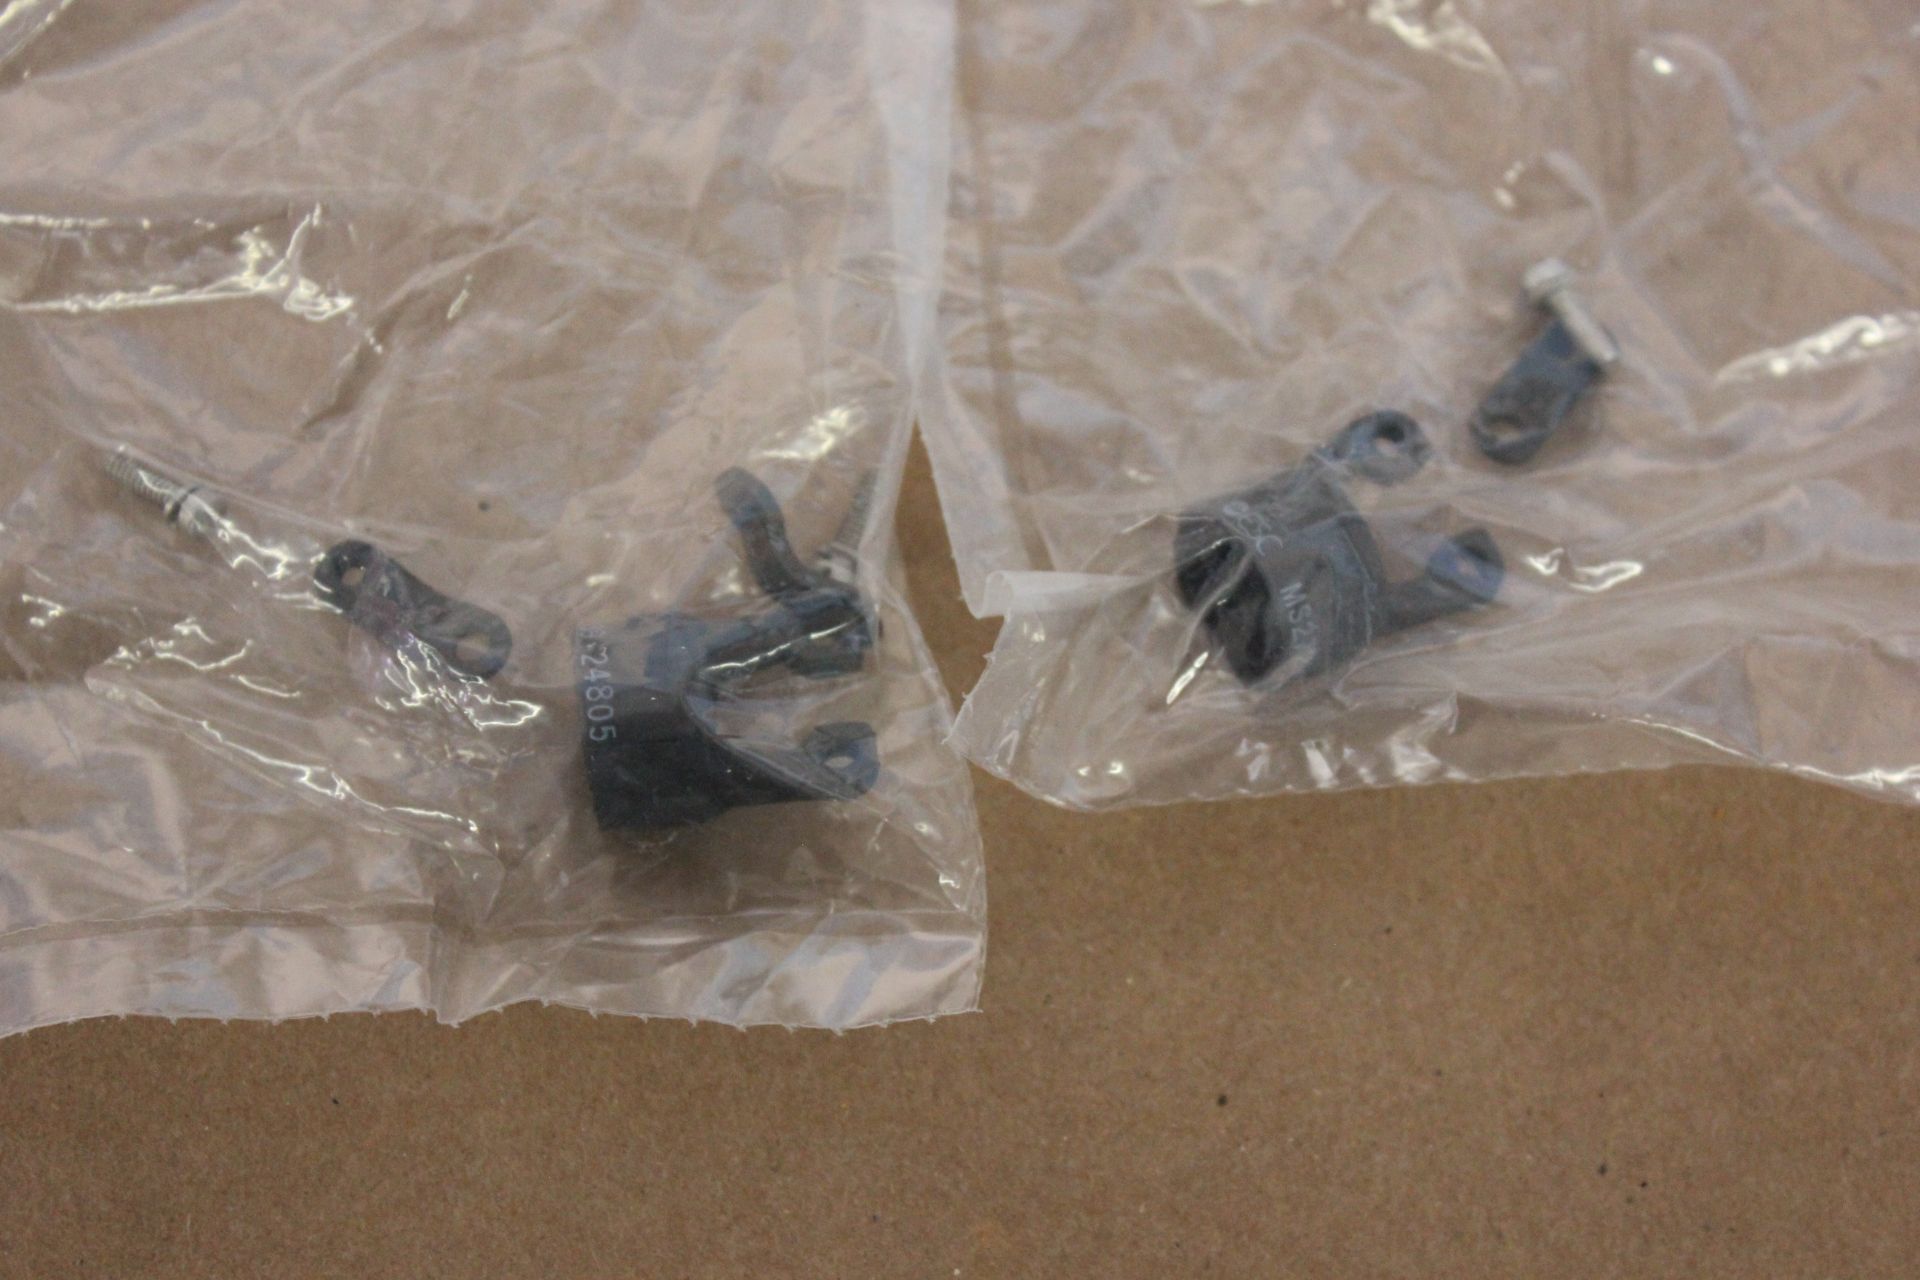 LOT OF NEW ESC MILITARY SPEC CONNECTOR STRAIN RELIEFS - Image 3 of 8